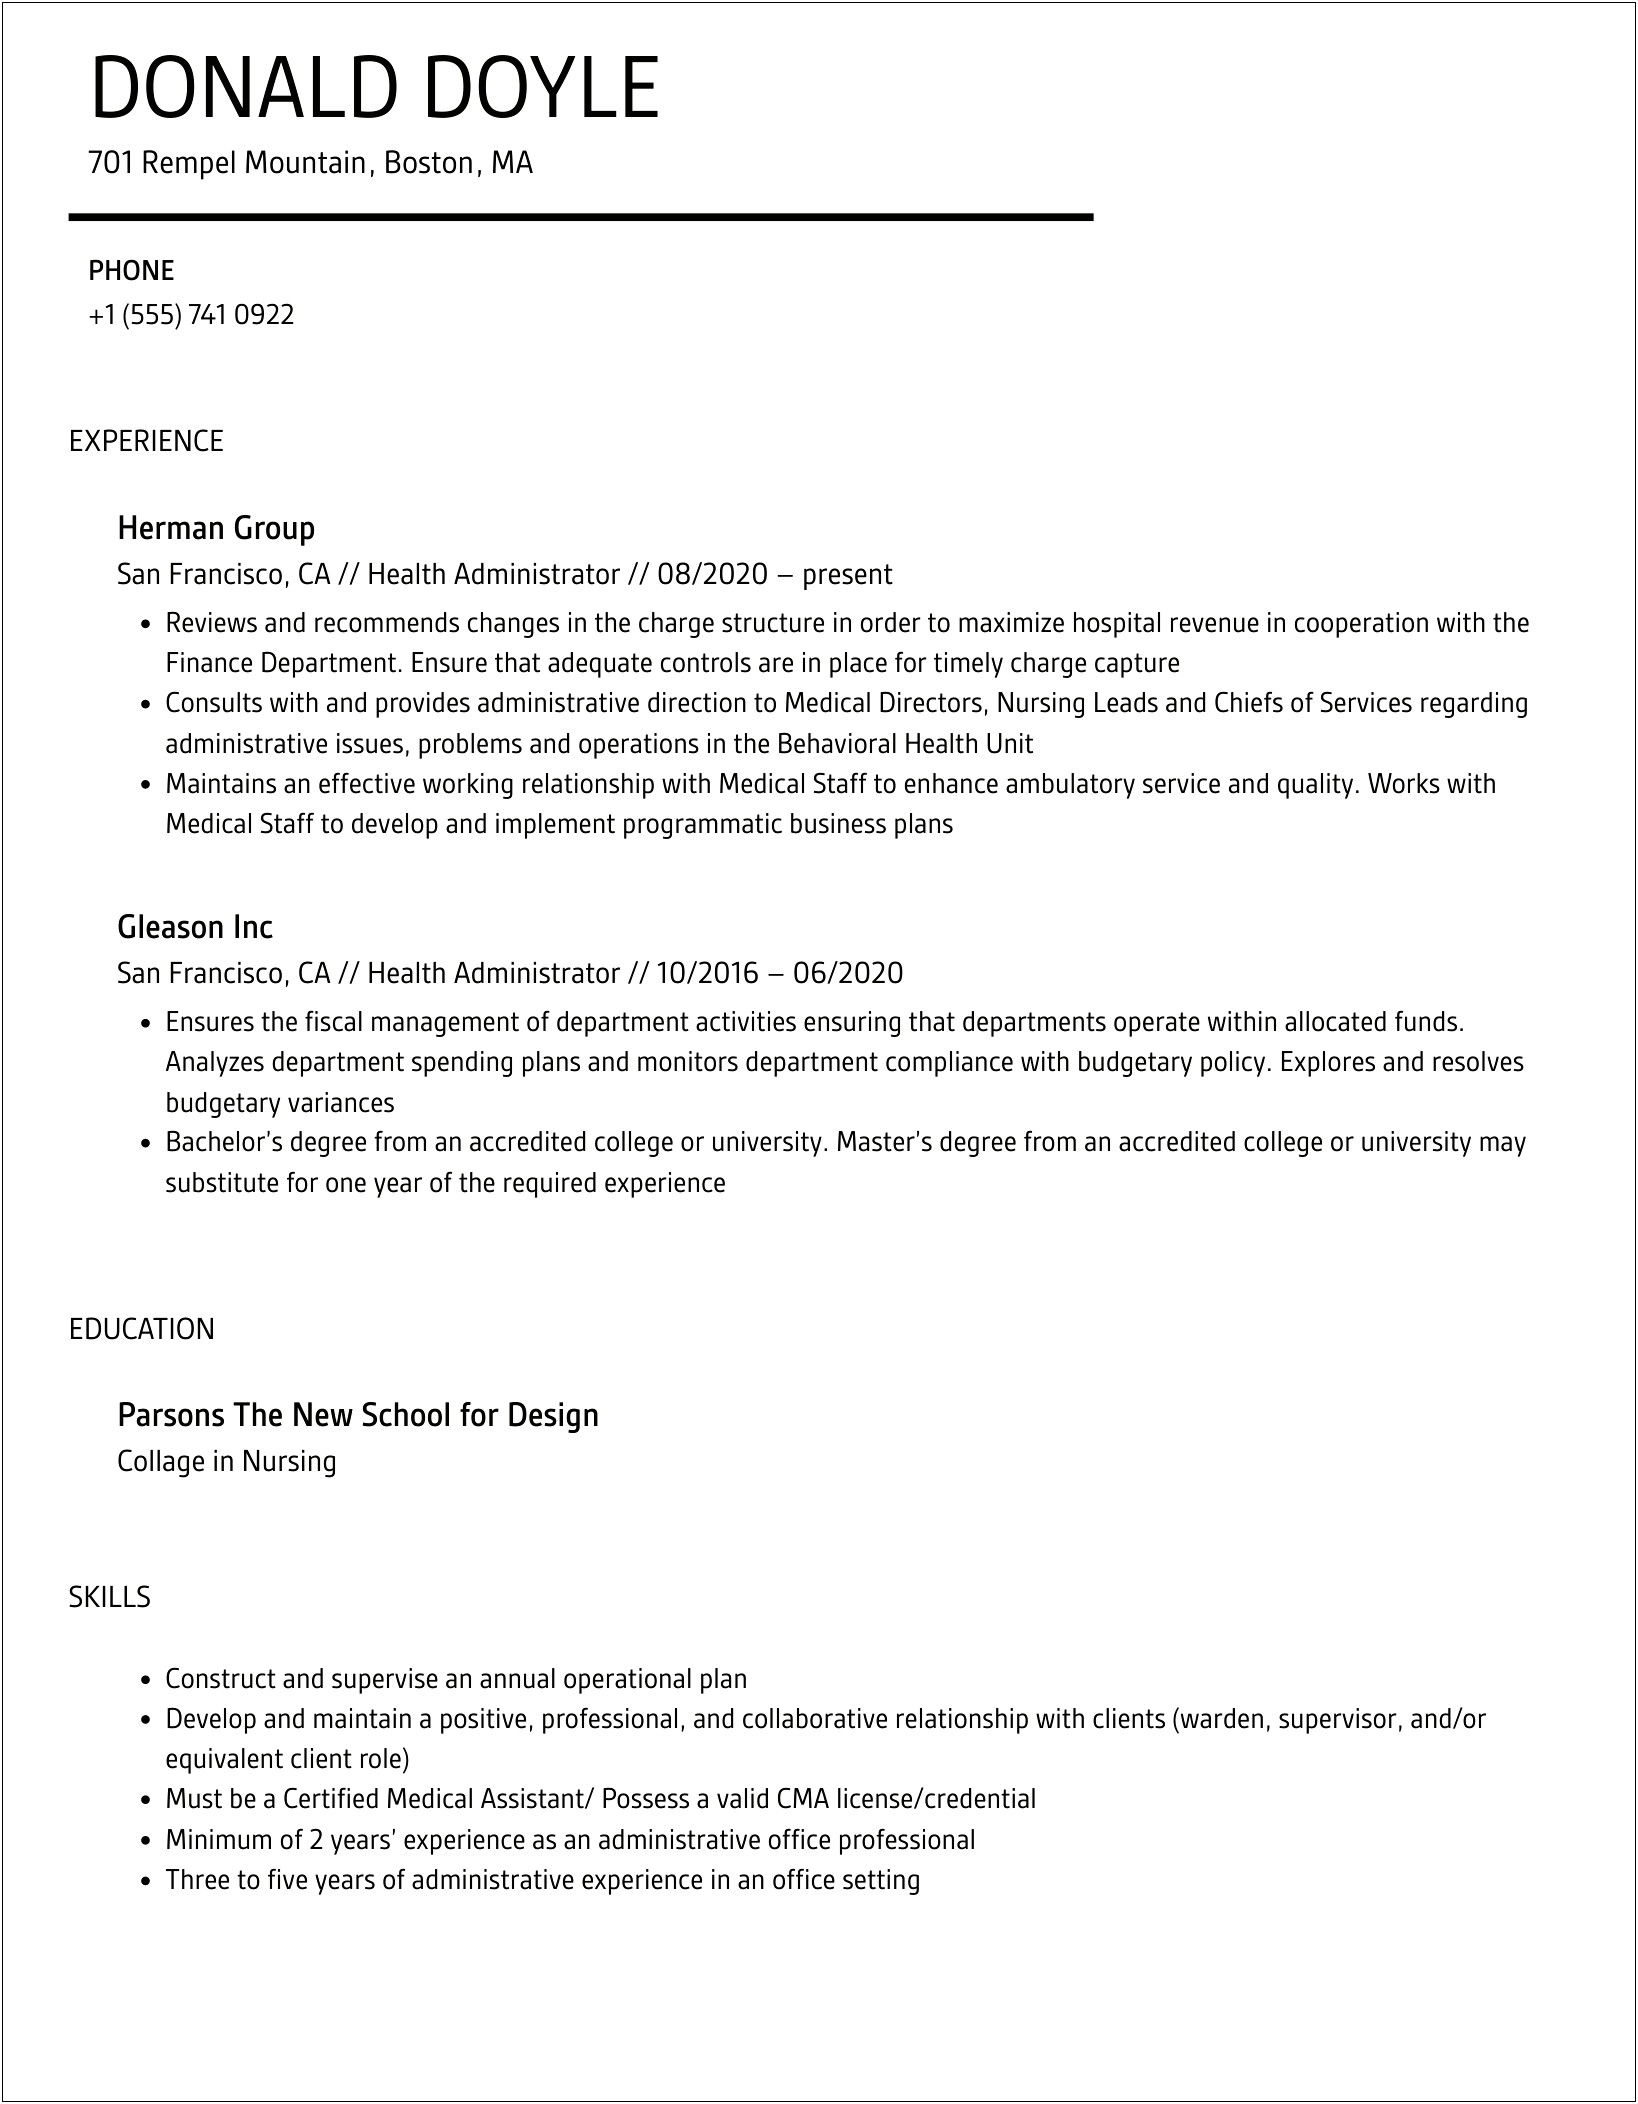 Sample Resume Healthcare Administrator With 10 Years Experience